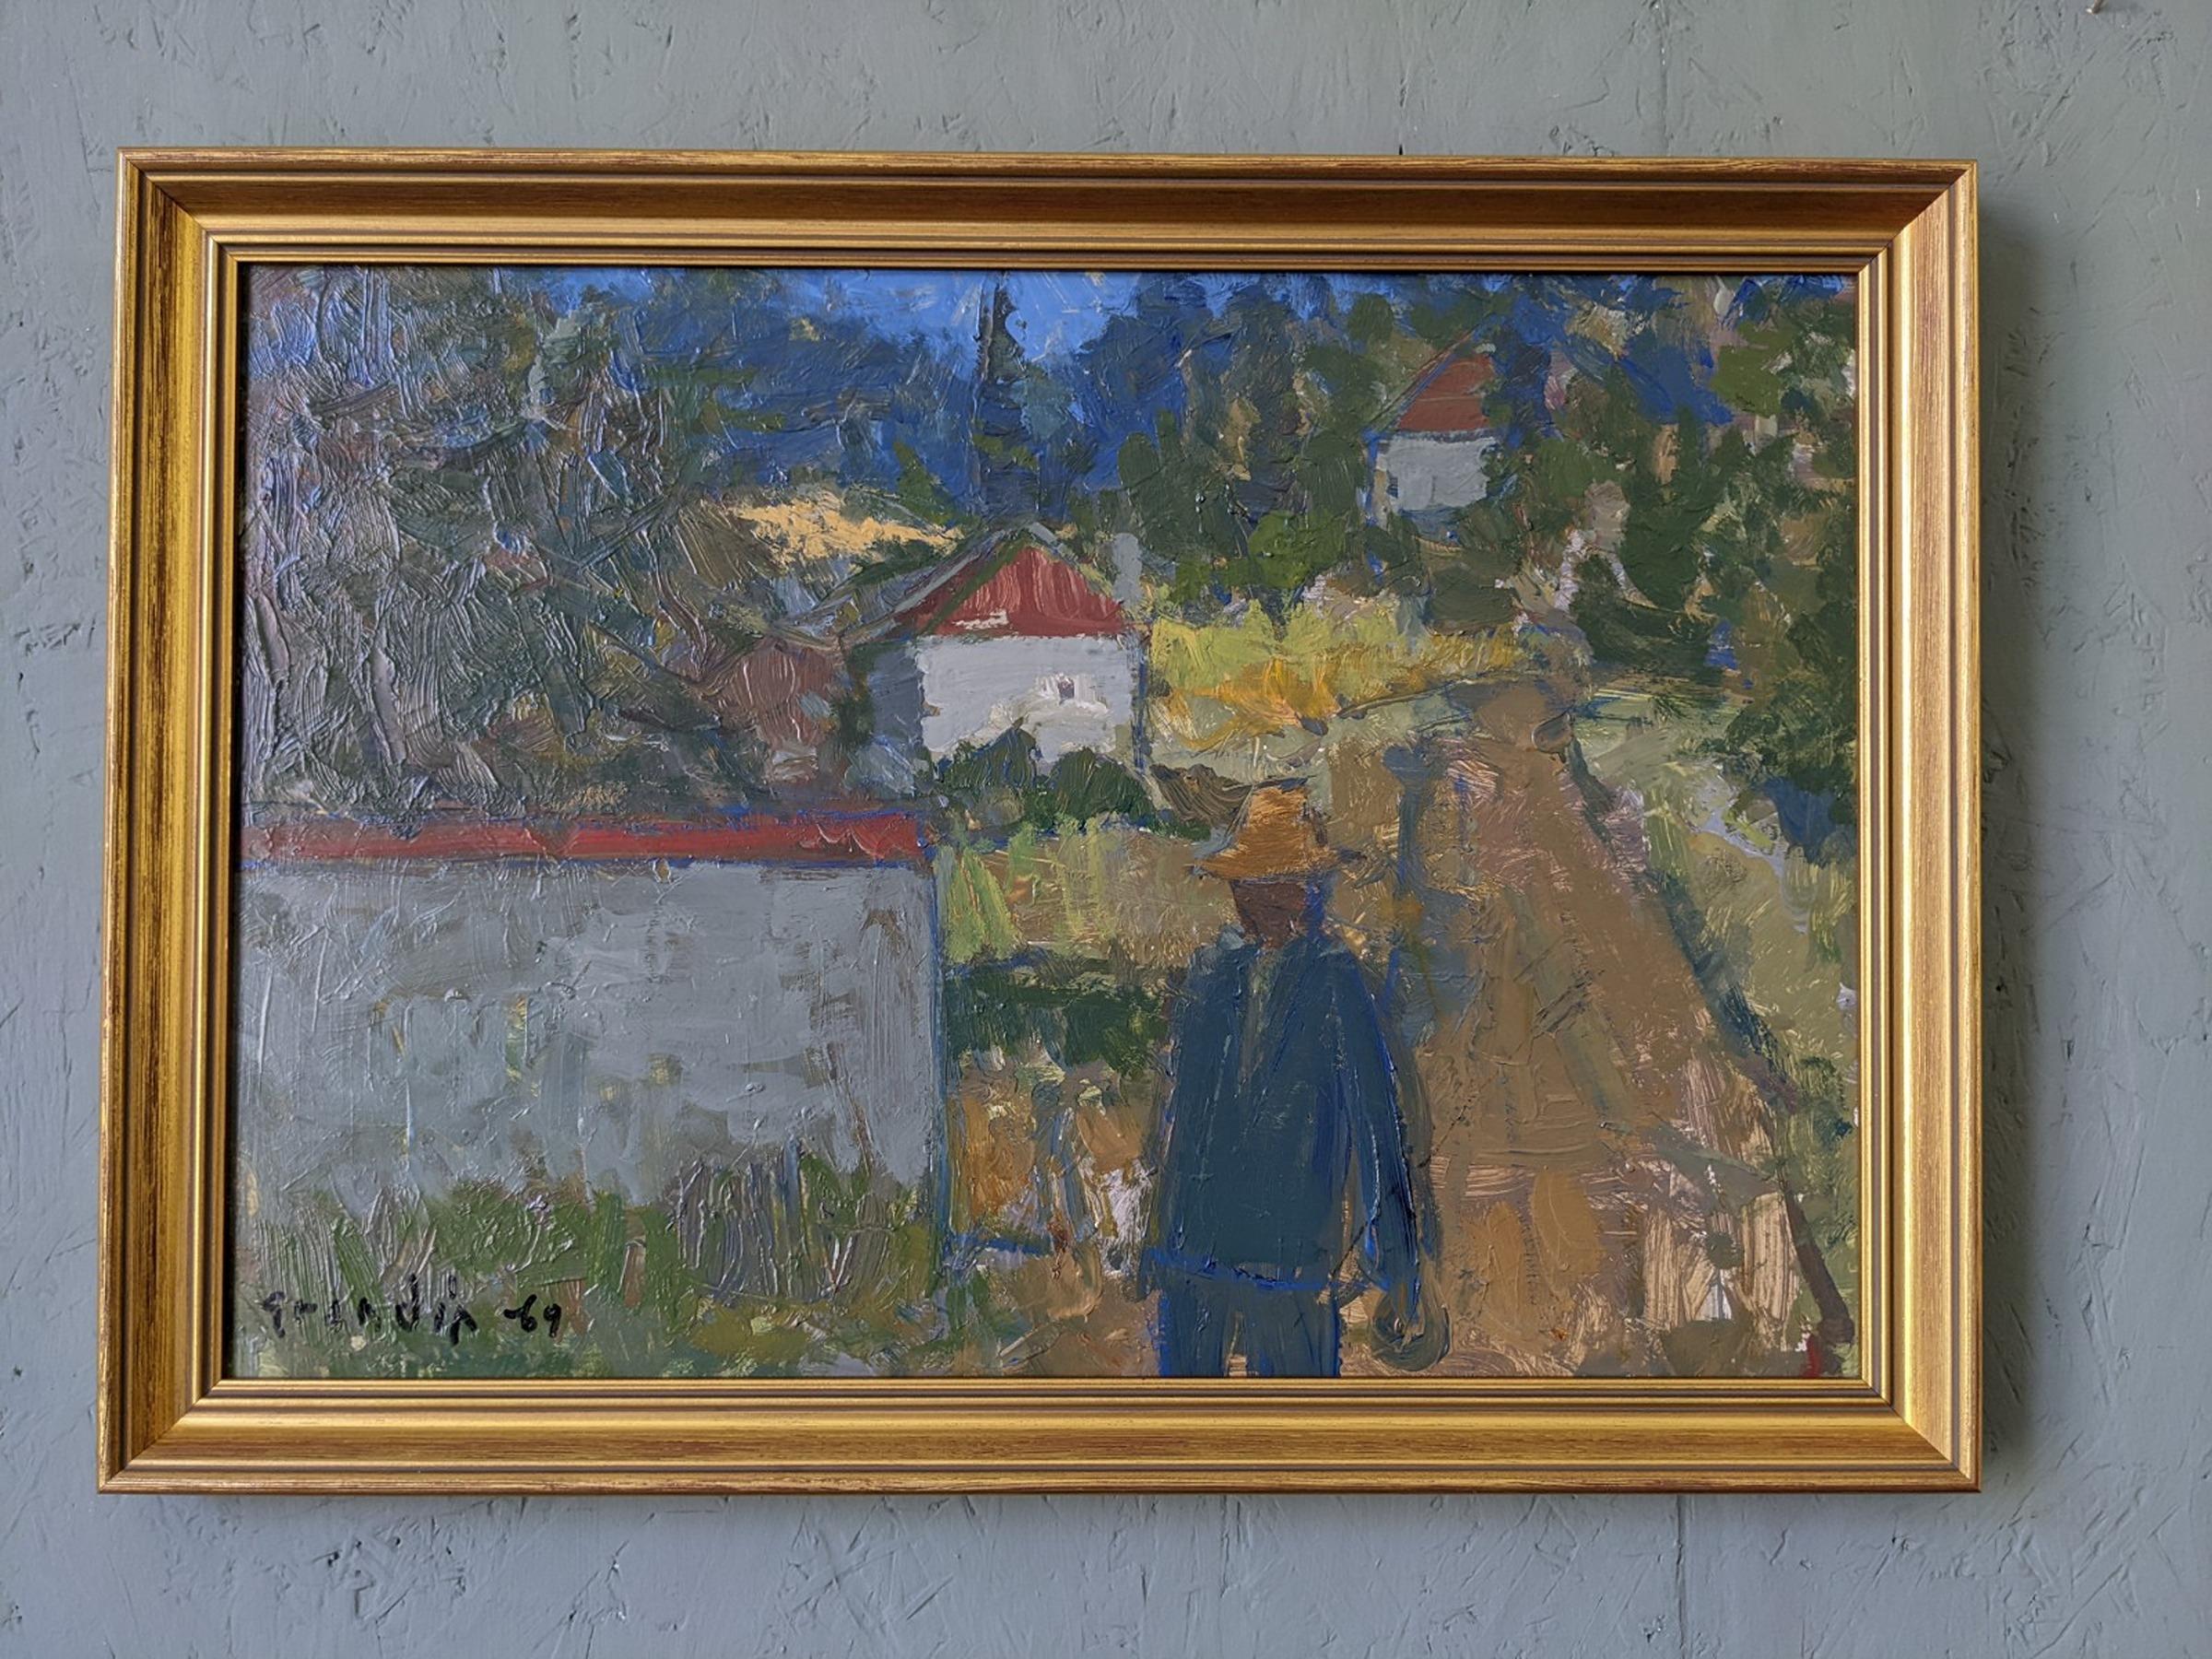 FOREST HOUSES
Size: 40 x 56 cm (including frame)
Oil on Panel

An expressive semi-abstract modernist composition, executed in oil onto board and dated 1969.

A figure dressed in blue and a hat is strolling leisurely on an inviting pathway that leads